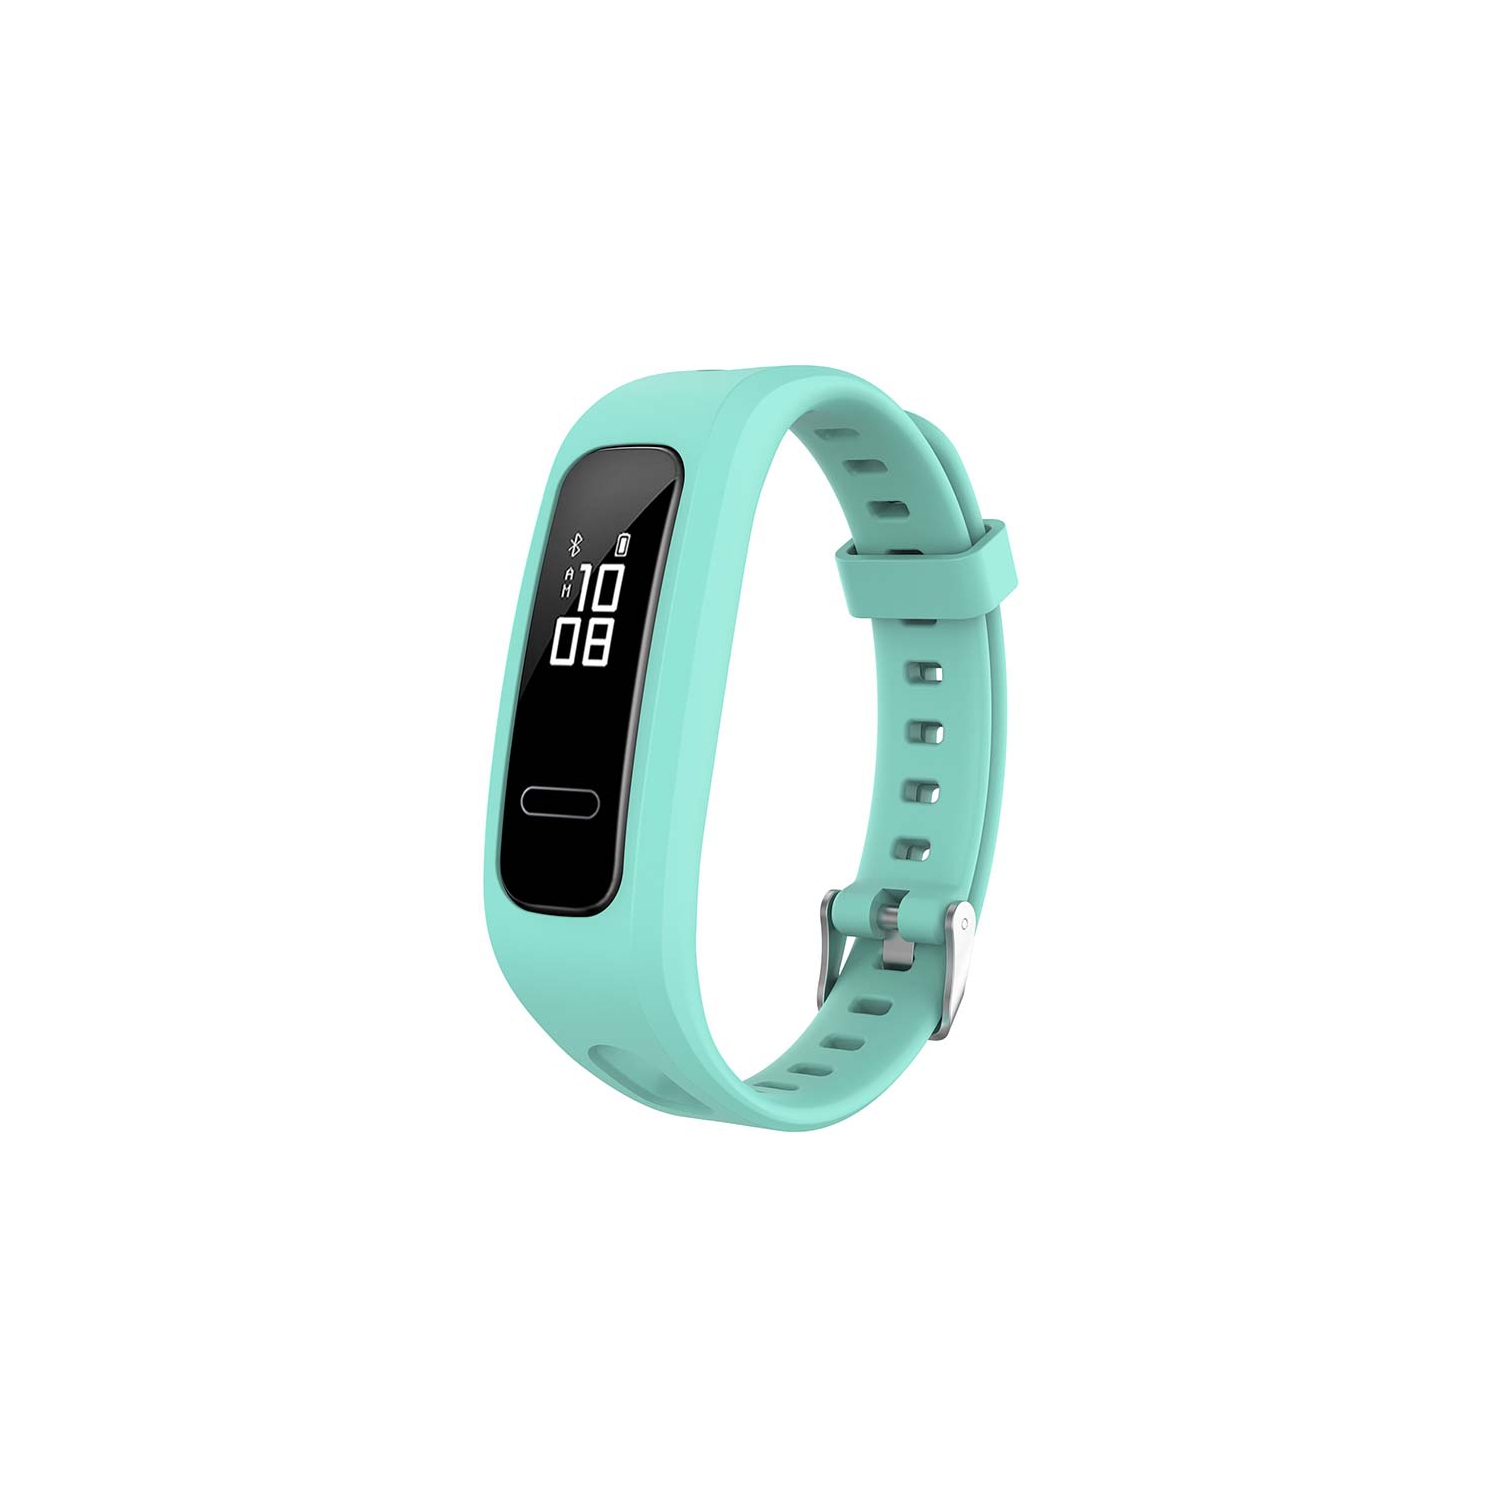 StrapsCo Silicone Rubber Watch Band Strap for Huawei Honor Band 4 Running Edition / 4e / 3e - Mint